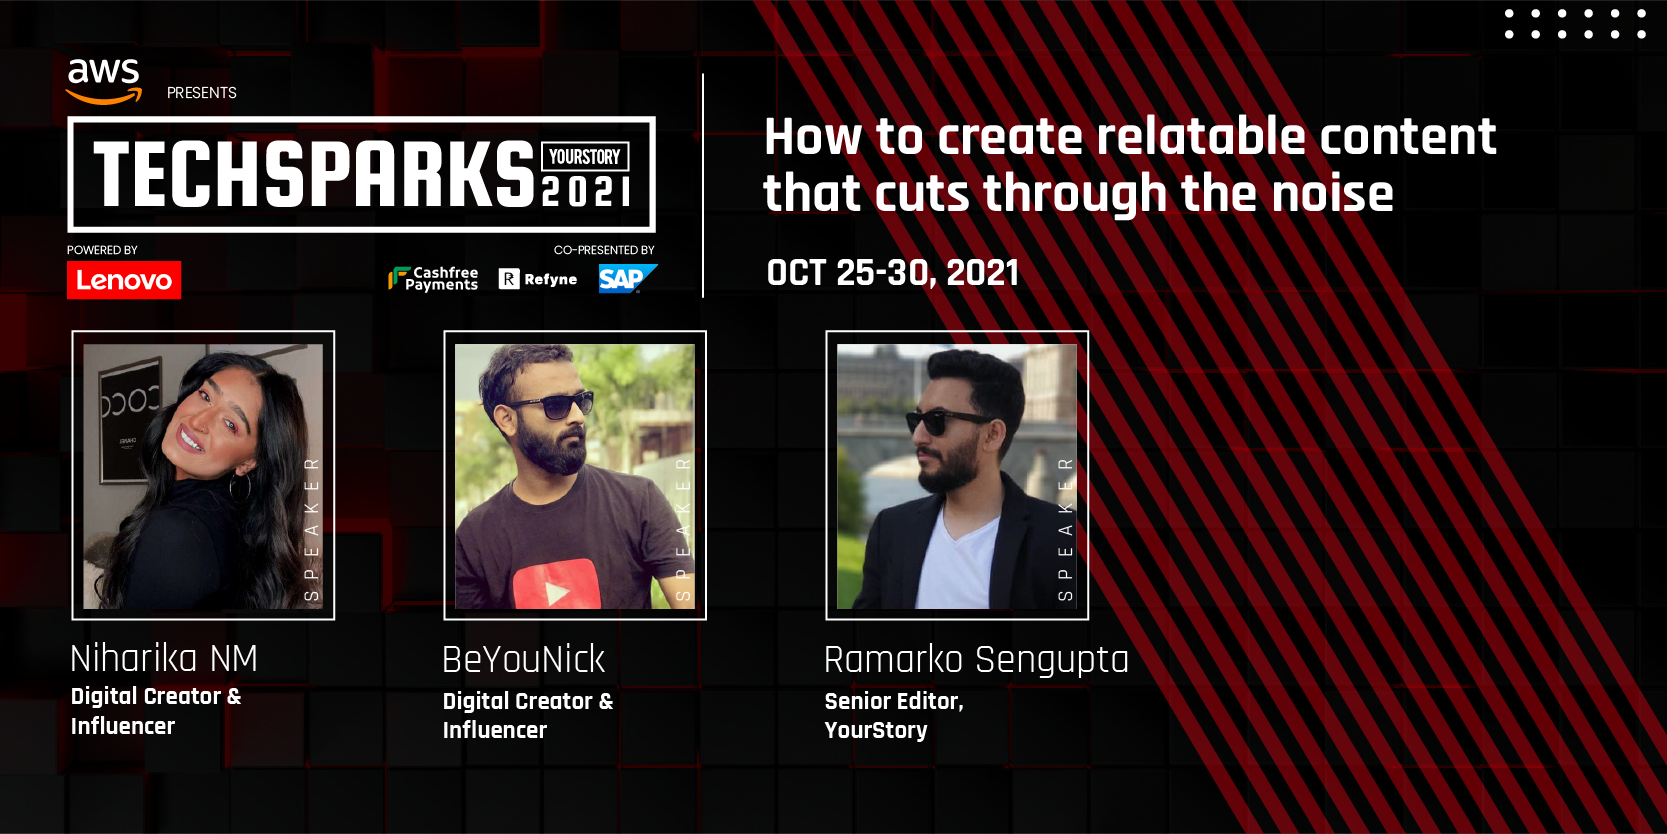 Embracing change, authenticity, and other key takeaways on content creation from Be YouNick and Niharika NM at TechSparks 2021